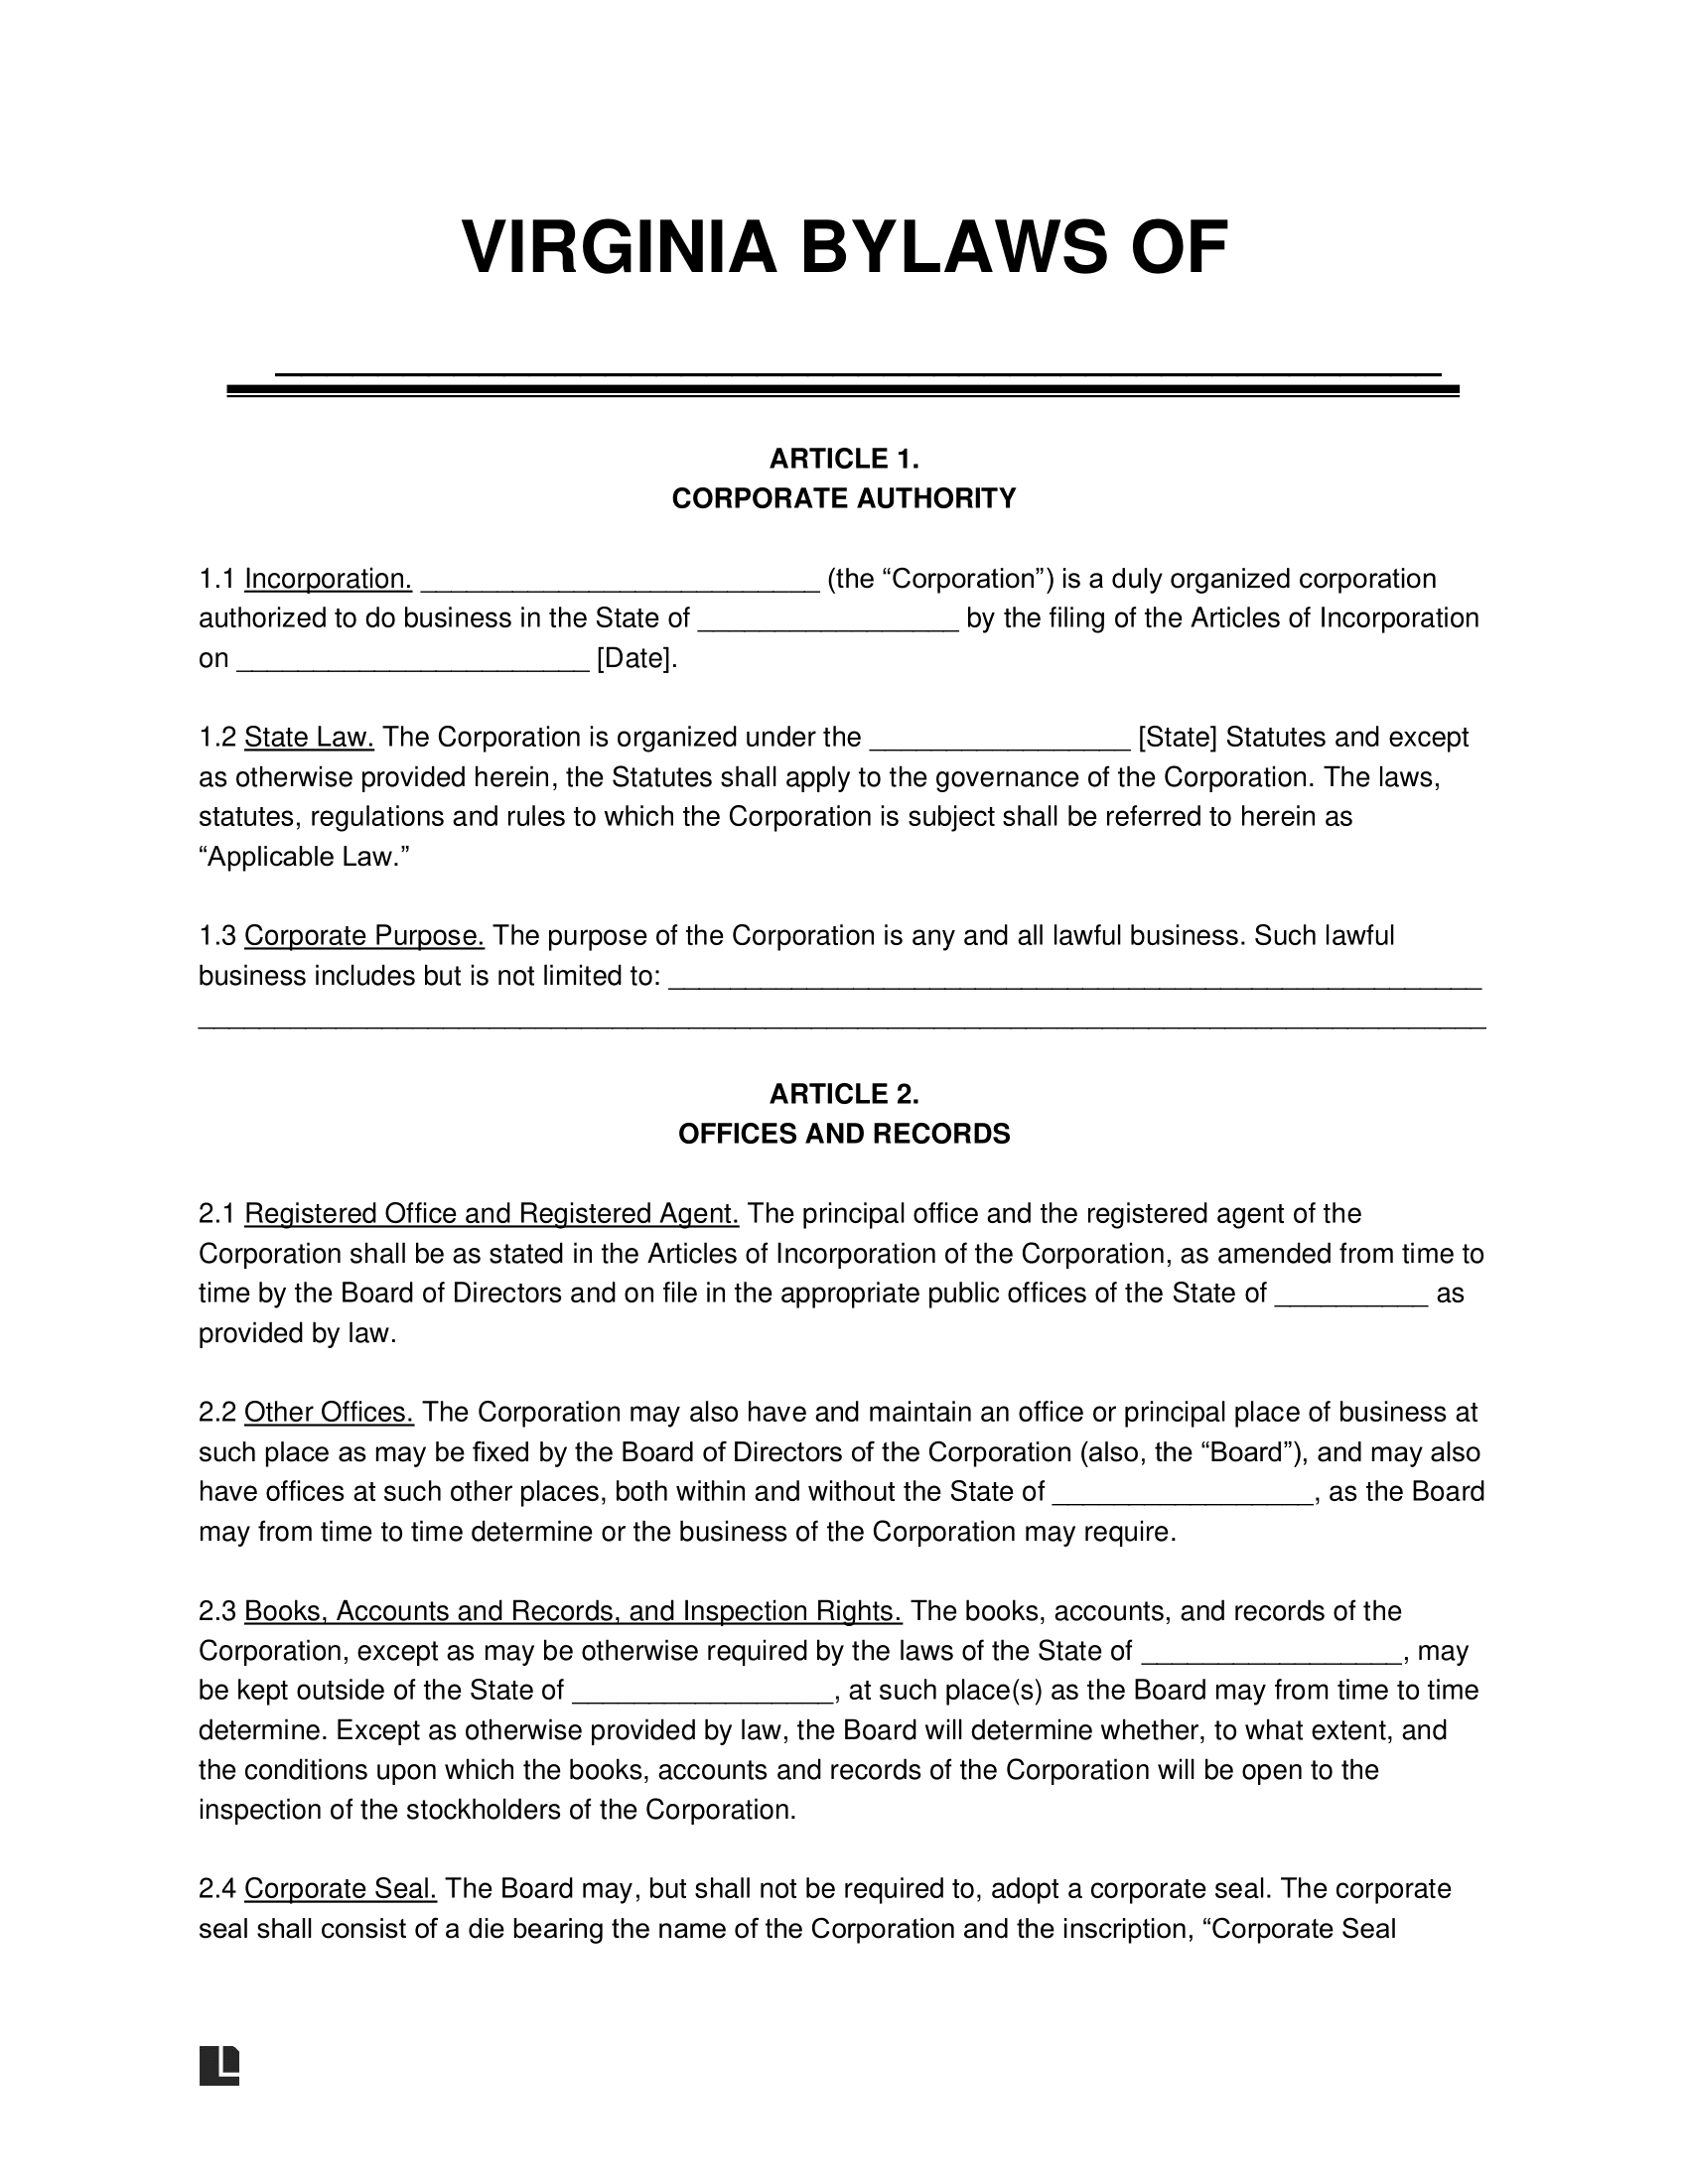 Virginia Corporate Bylaws Template